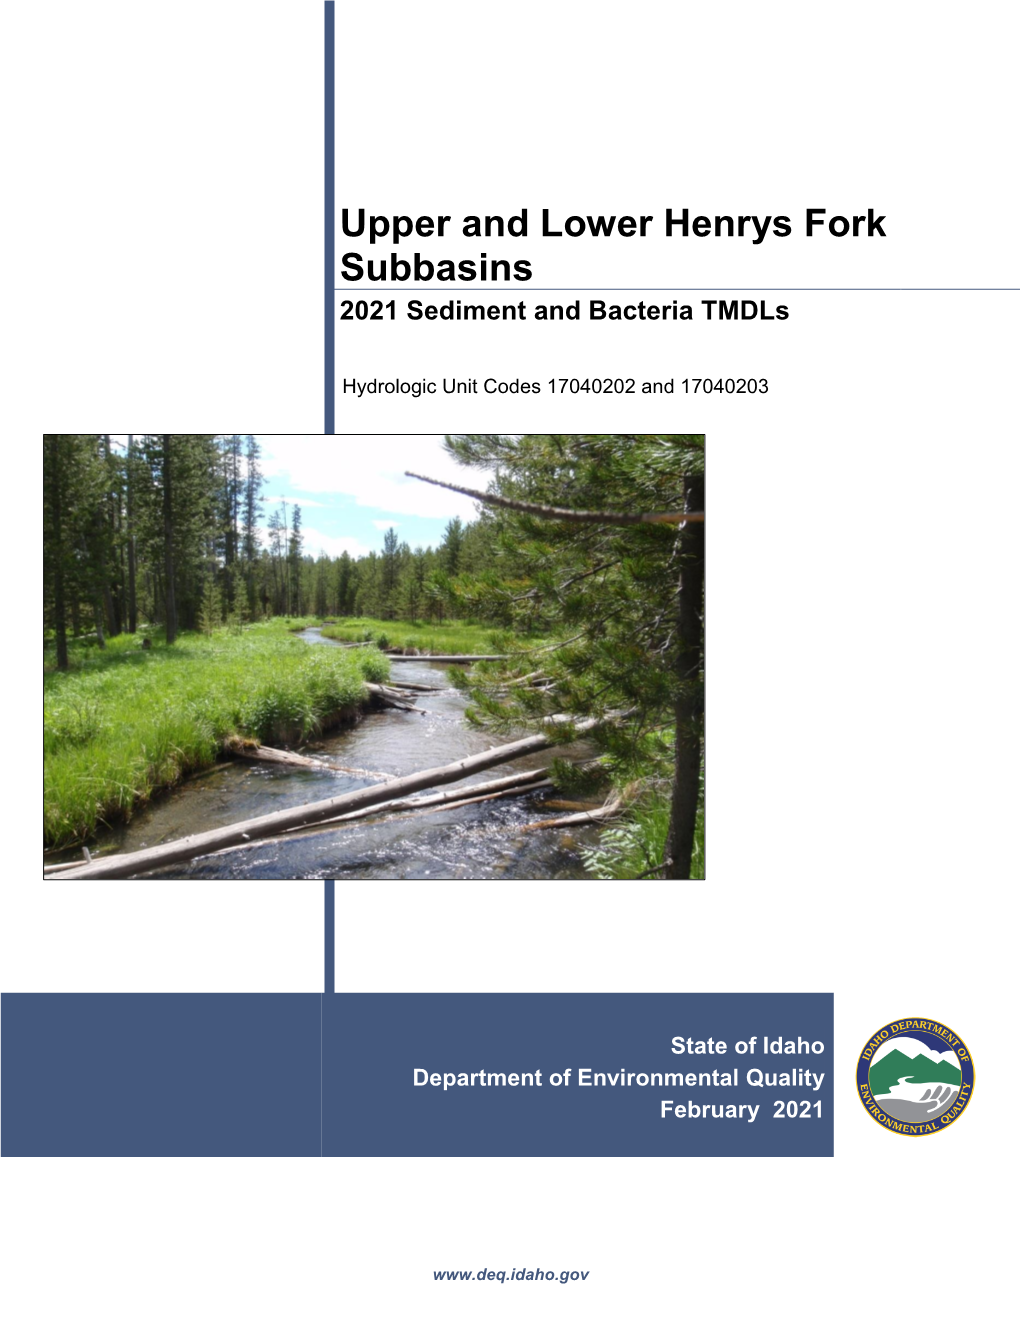 Upper and Lower Henrys Fork Subbasins 2021 Sediment and Bacteria Tmdls